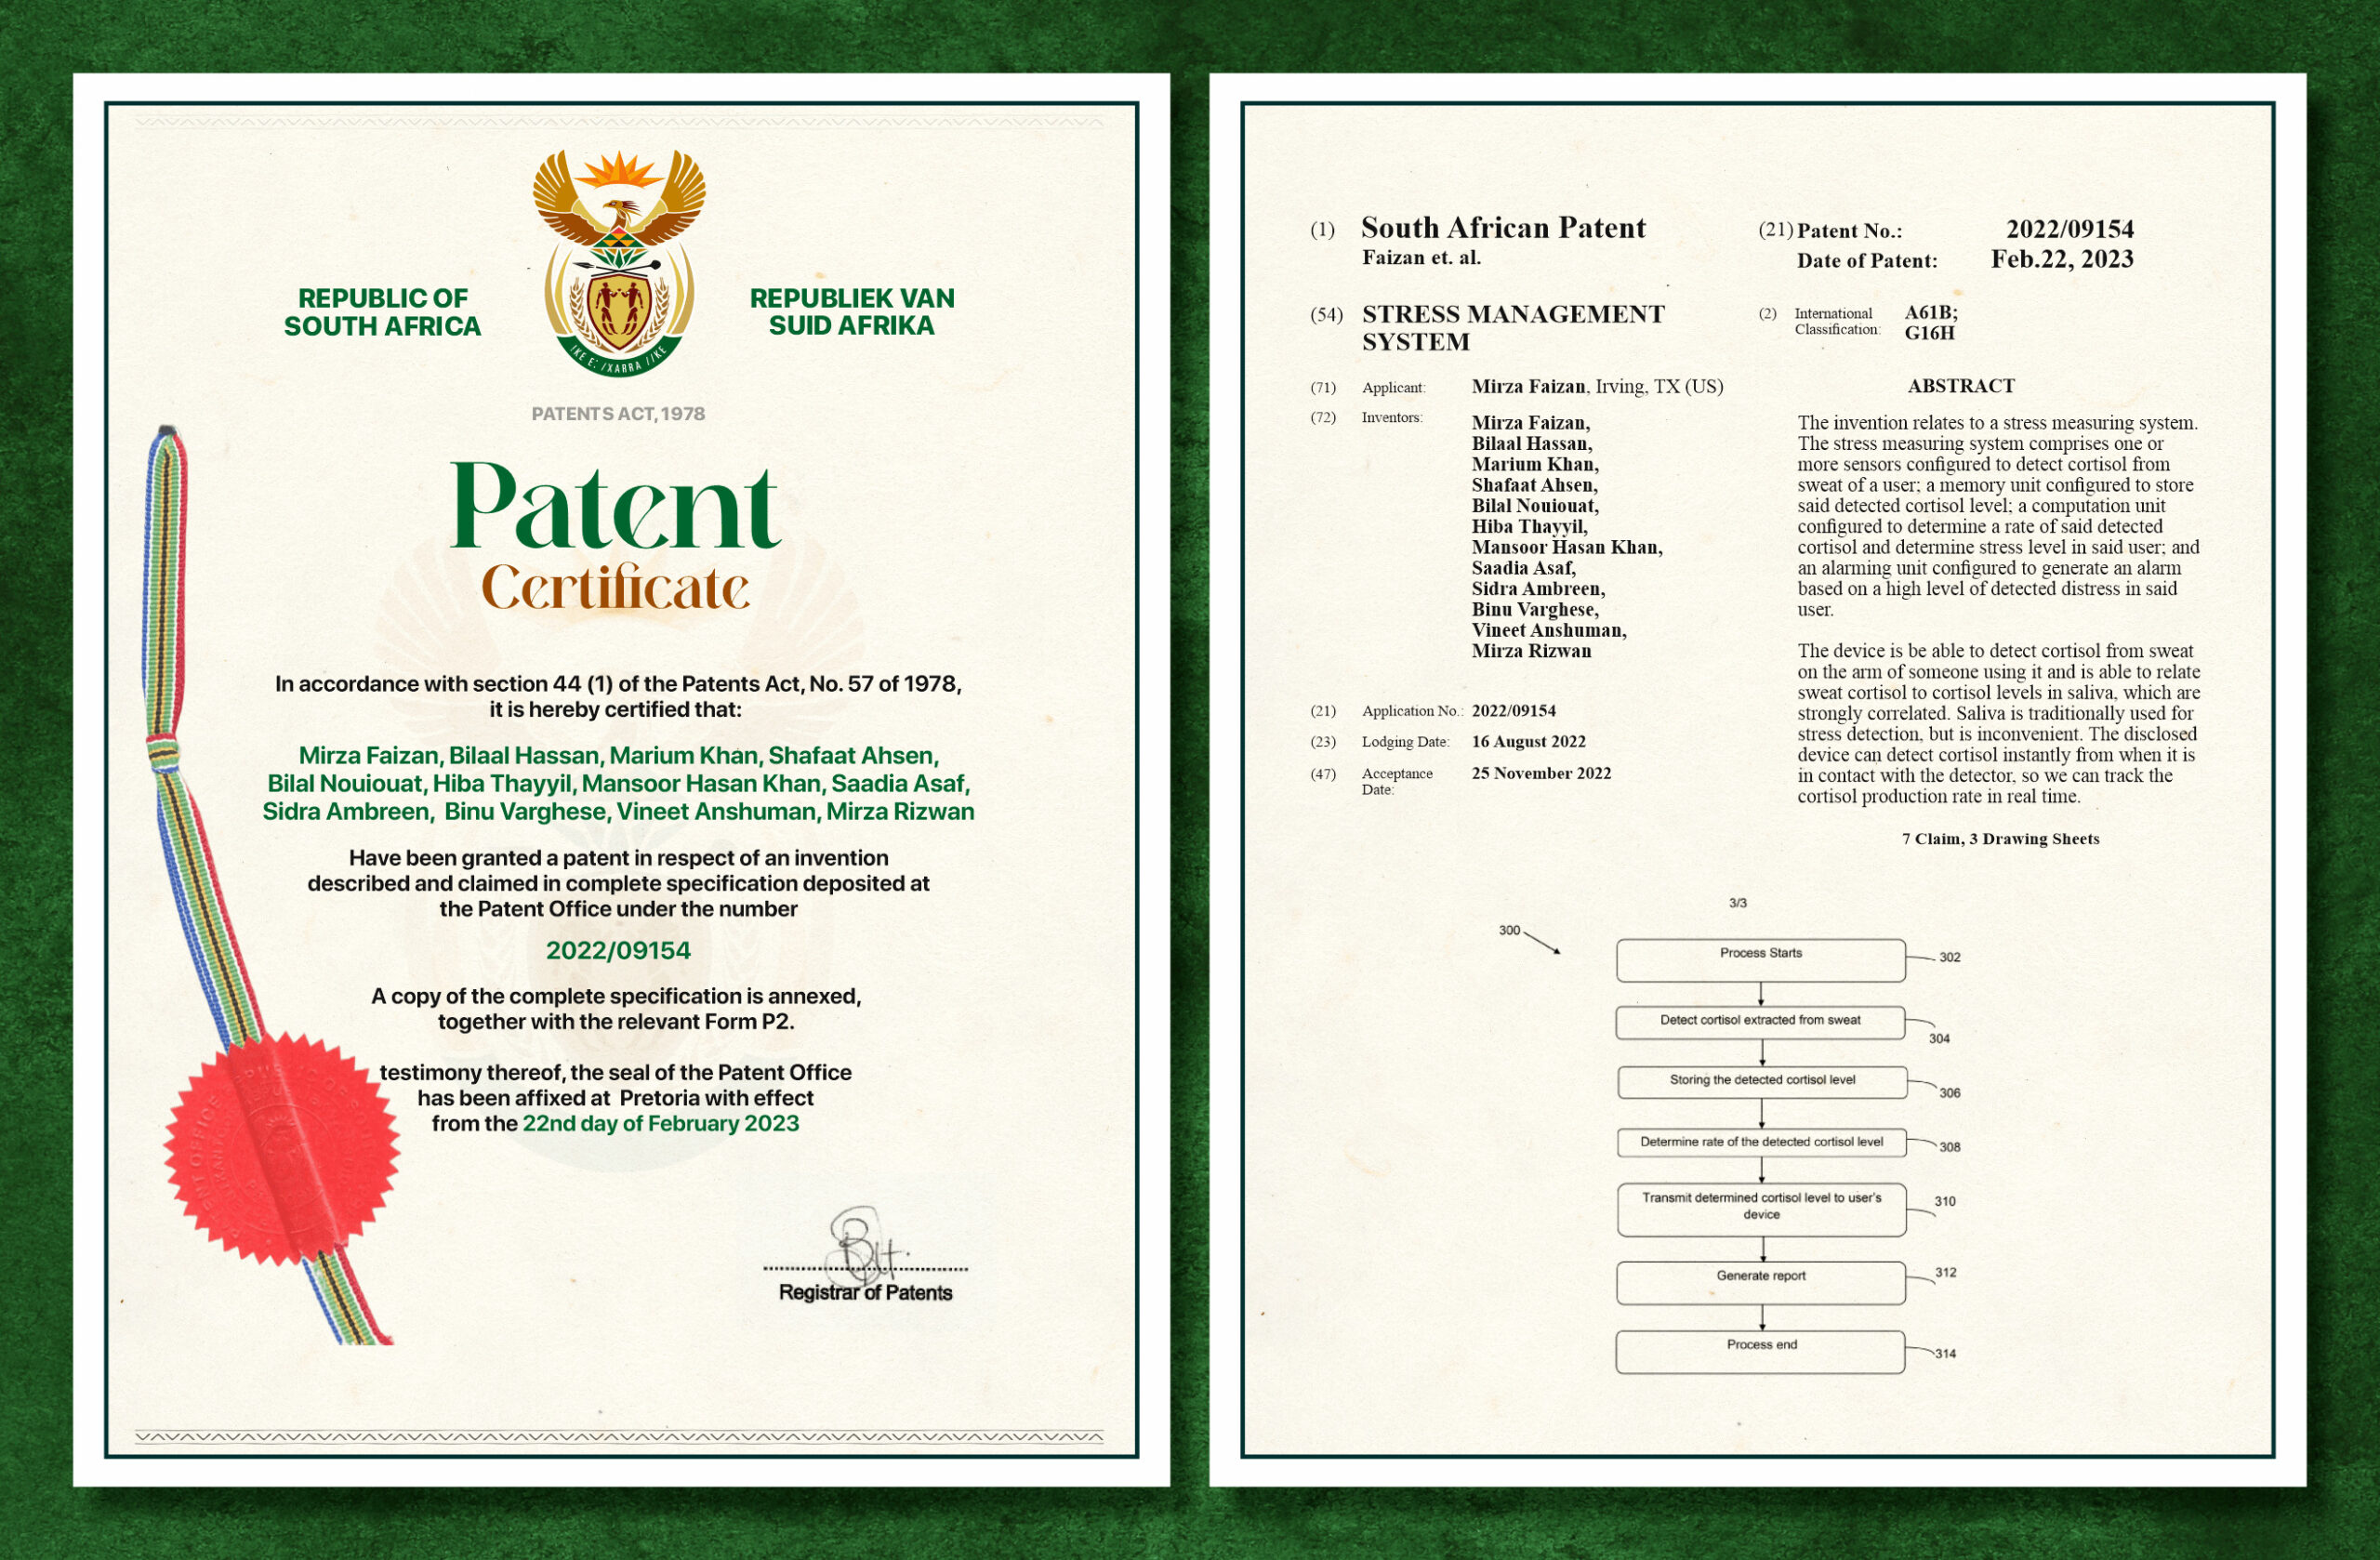 SA Patent Certificate System to detect and manage Stress South African Patent No.: 2022/09154